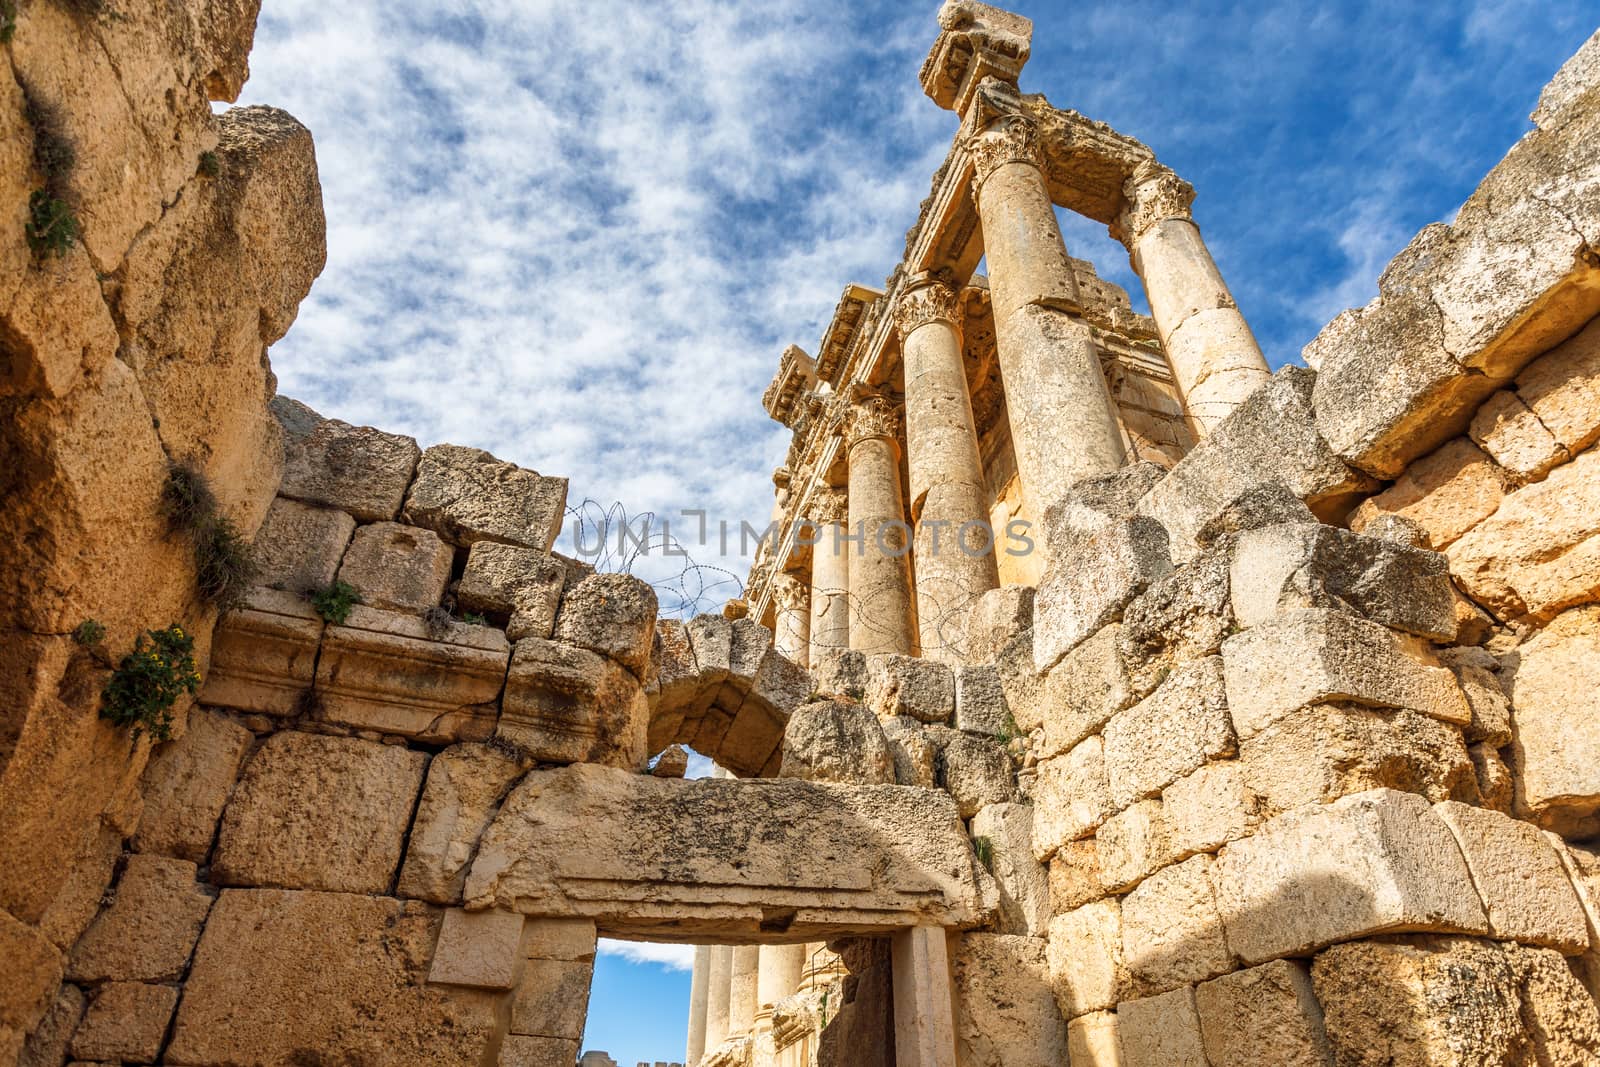 Columns of ancient Roman temple of Bacchus with surrounding ruins and blue sky in the background, Beqaa Valley, Baalbeck, Lebanon